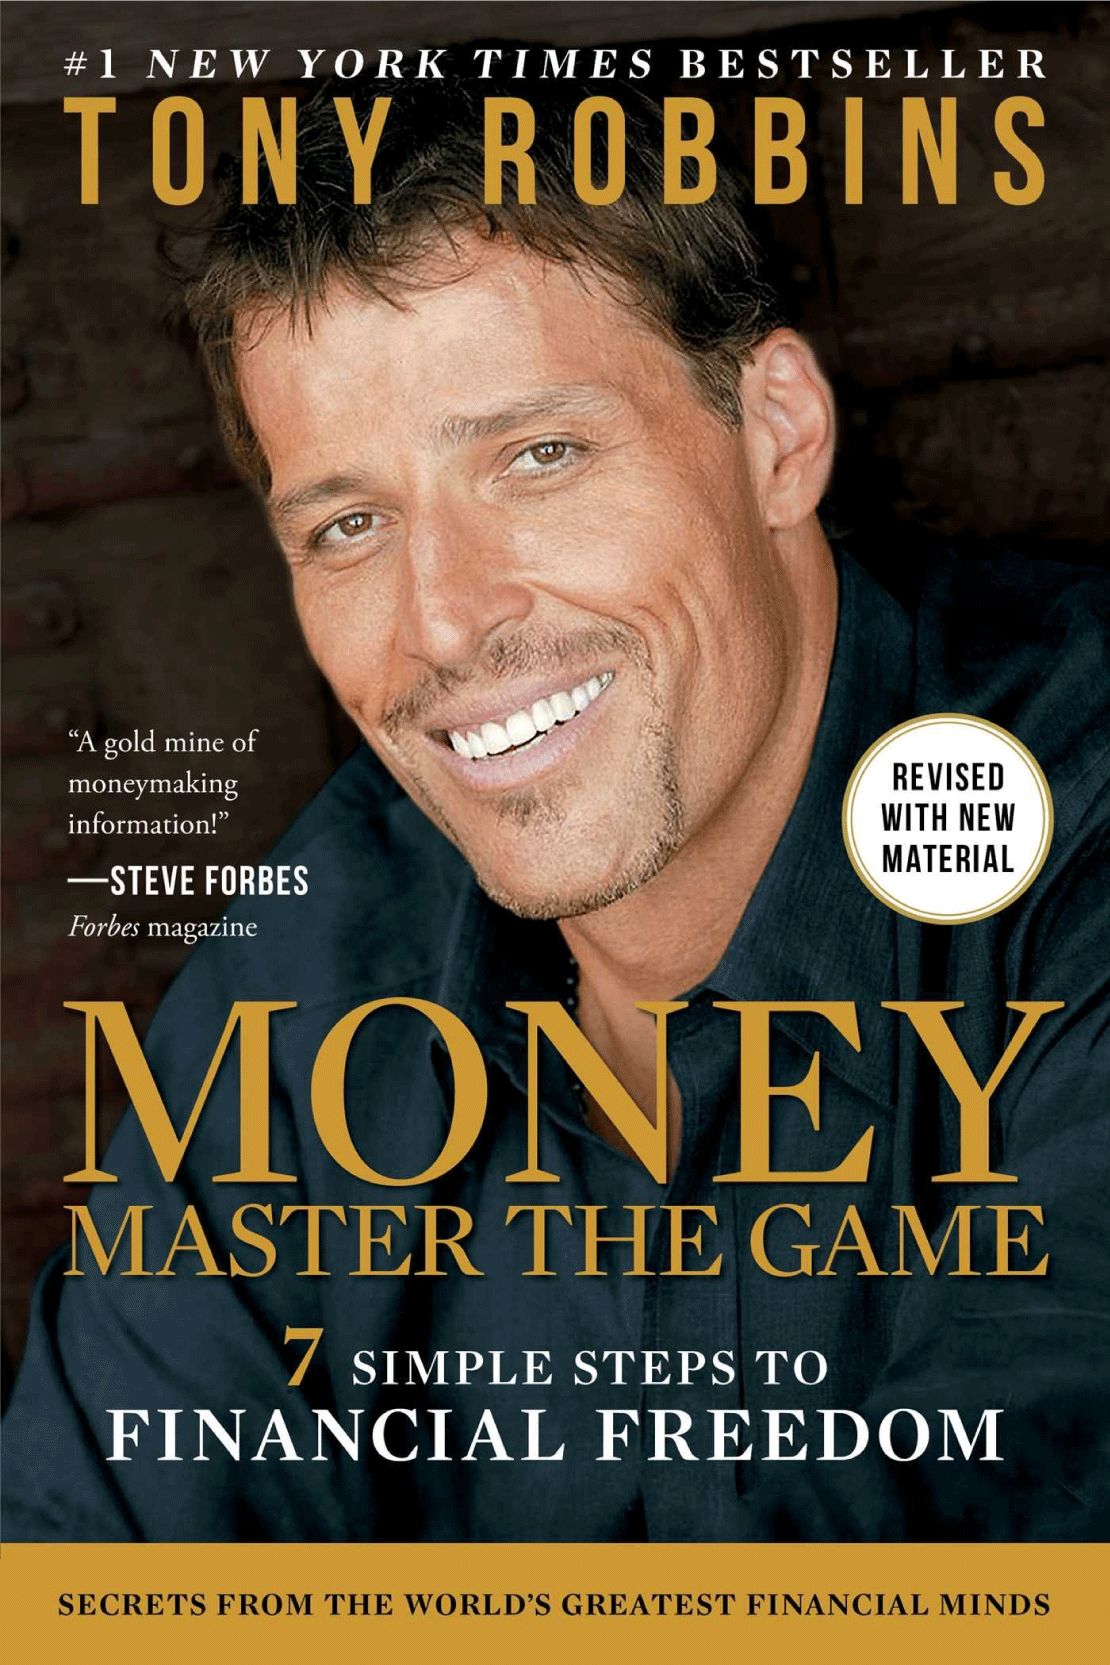 Books on Leadership - Cover of Money: Master the Game - Tony Robbins